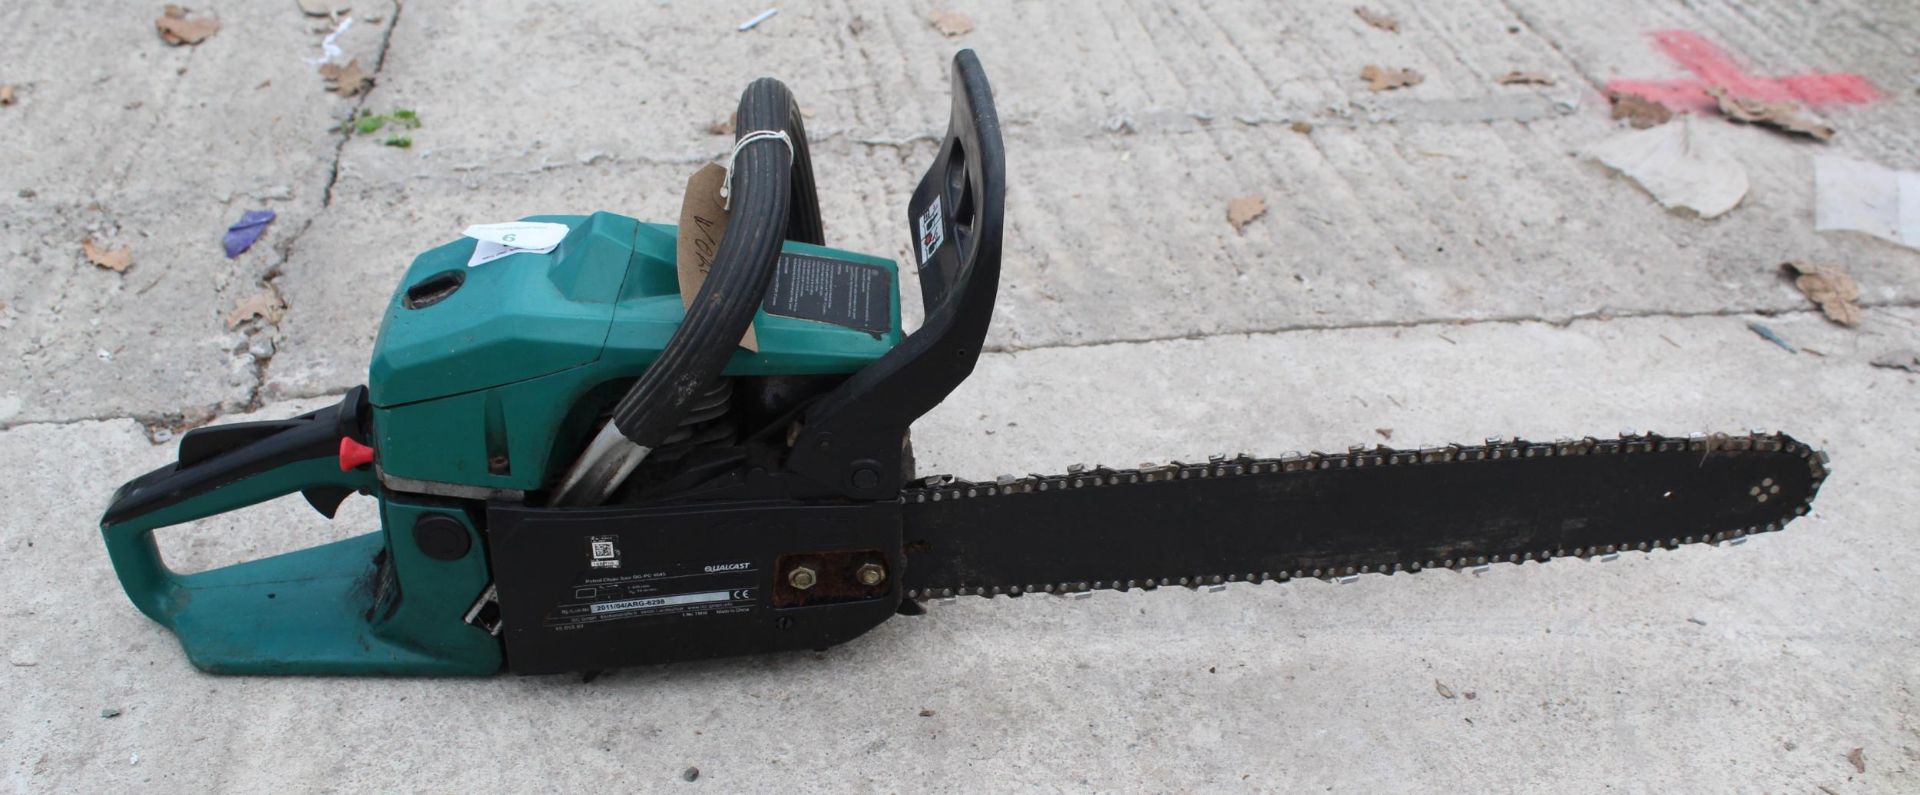 QUALCAST PETROL CHAINSAW GOOD WORKING ORDER NO VAT - Image 3 of 3